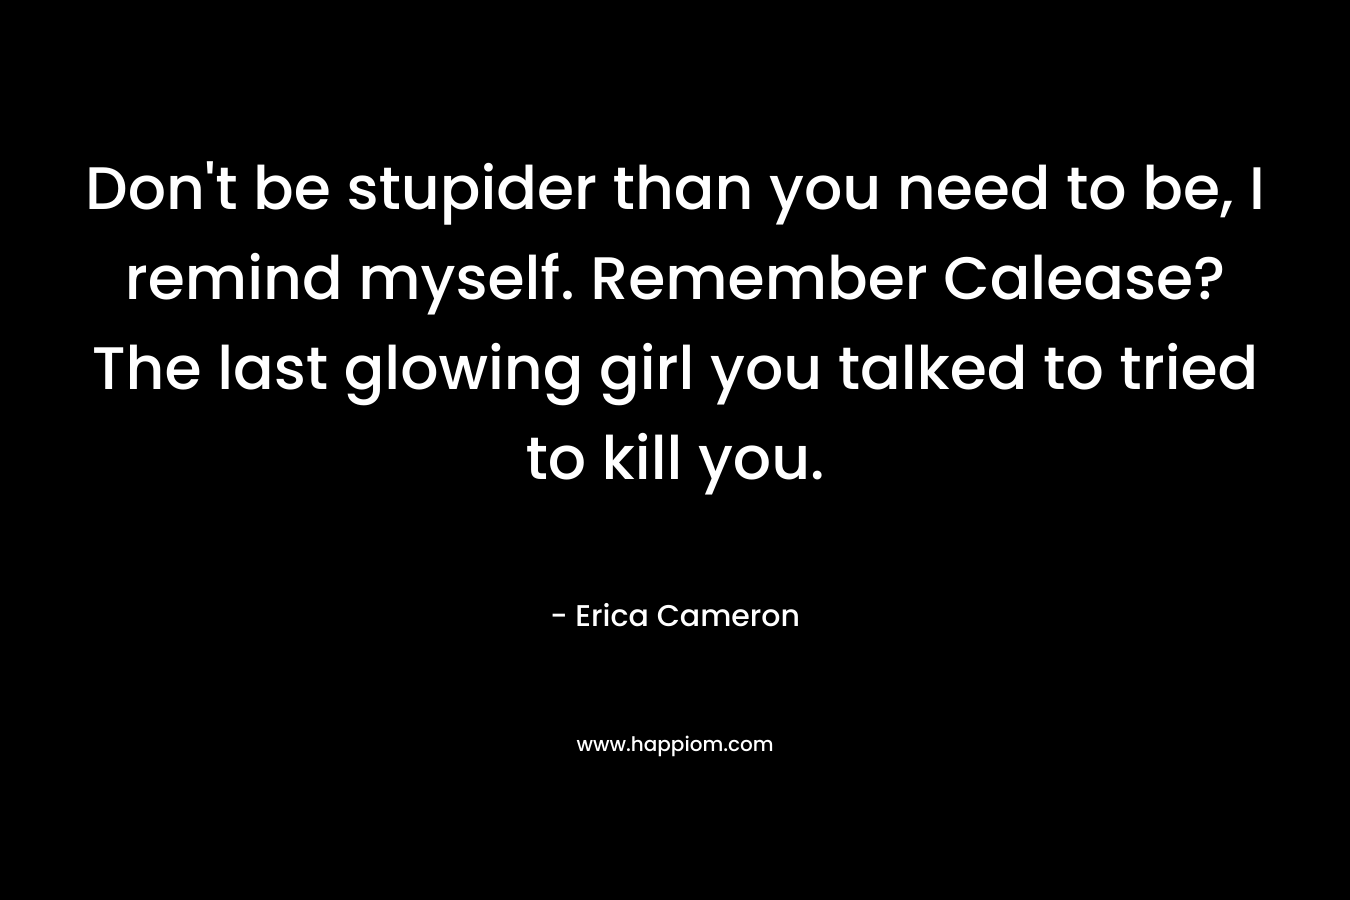 Don’t be stupider than you need to be, I remind myself. Remember Calease? The last glowing girl you talked to tried to kill you. – Erica Cameron